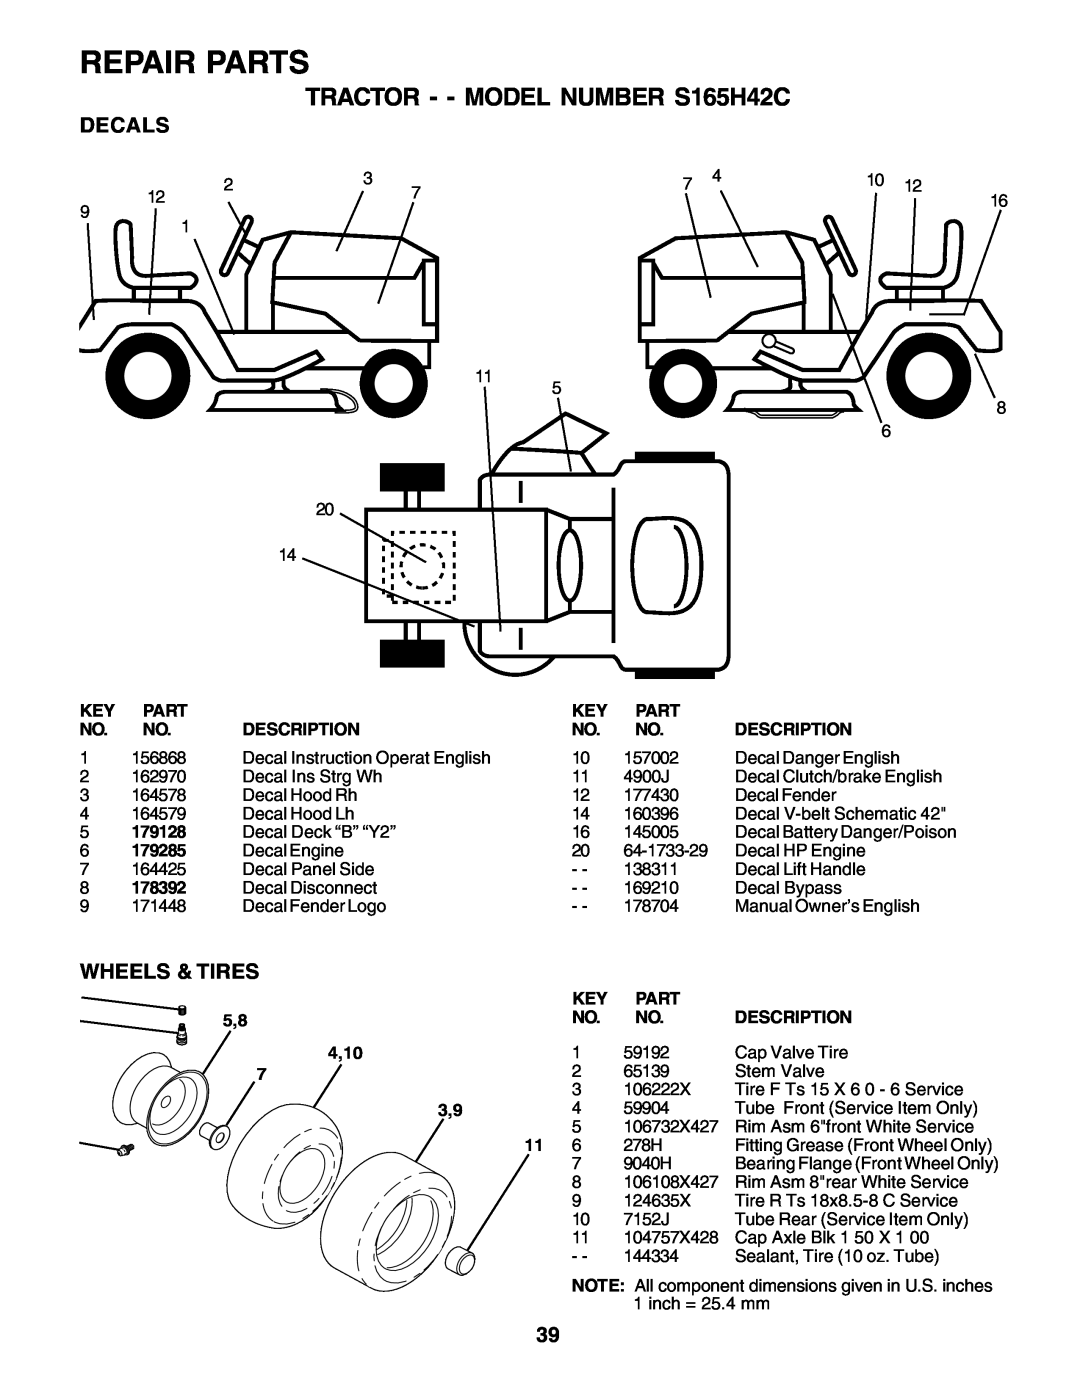 Weed Eater 178704 manual Repair Parts, TRACTOR - - MODEL NUMBER S165H42C, Decals, Wheels & Tires 